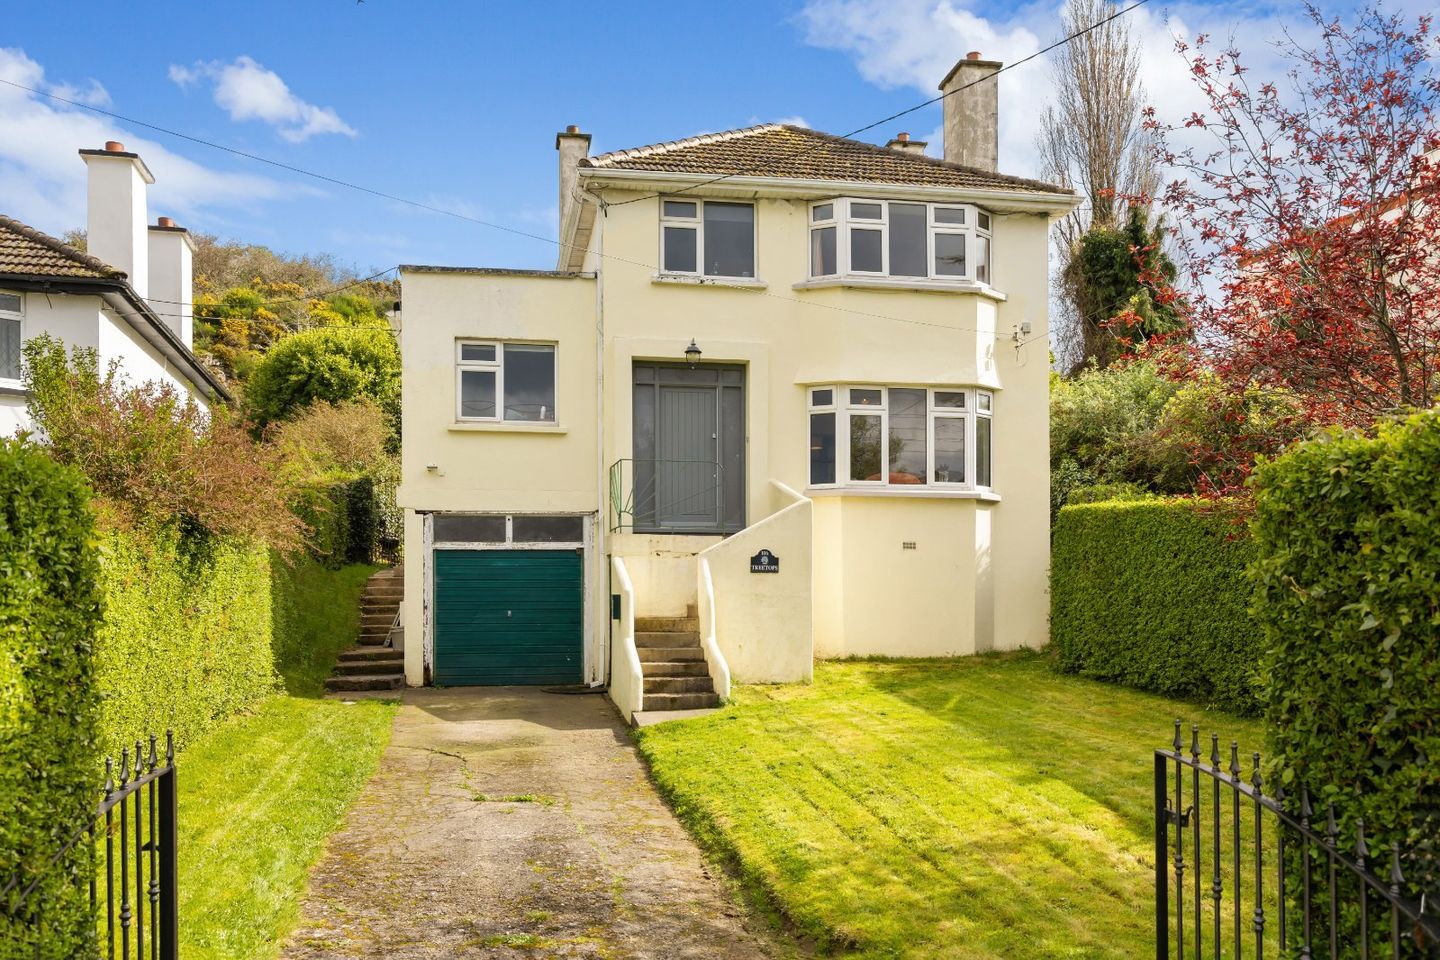 Treetops, 106 Newcourt Road, Bray, Co. Wicklow, A98F6R3